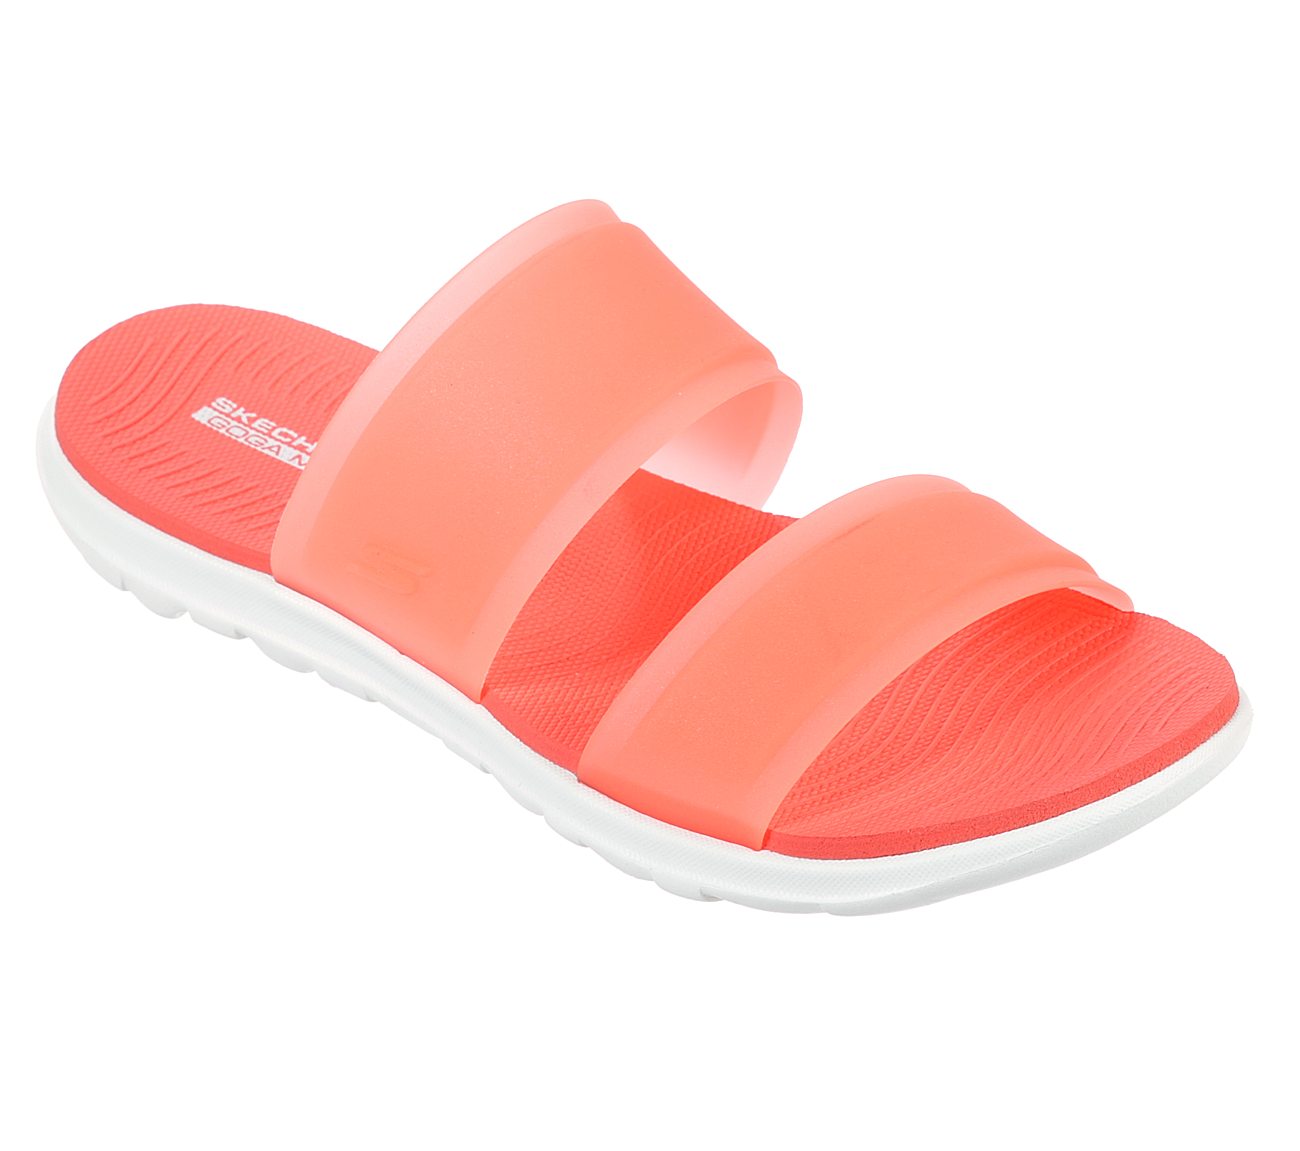 skechers jelly shoes